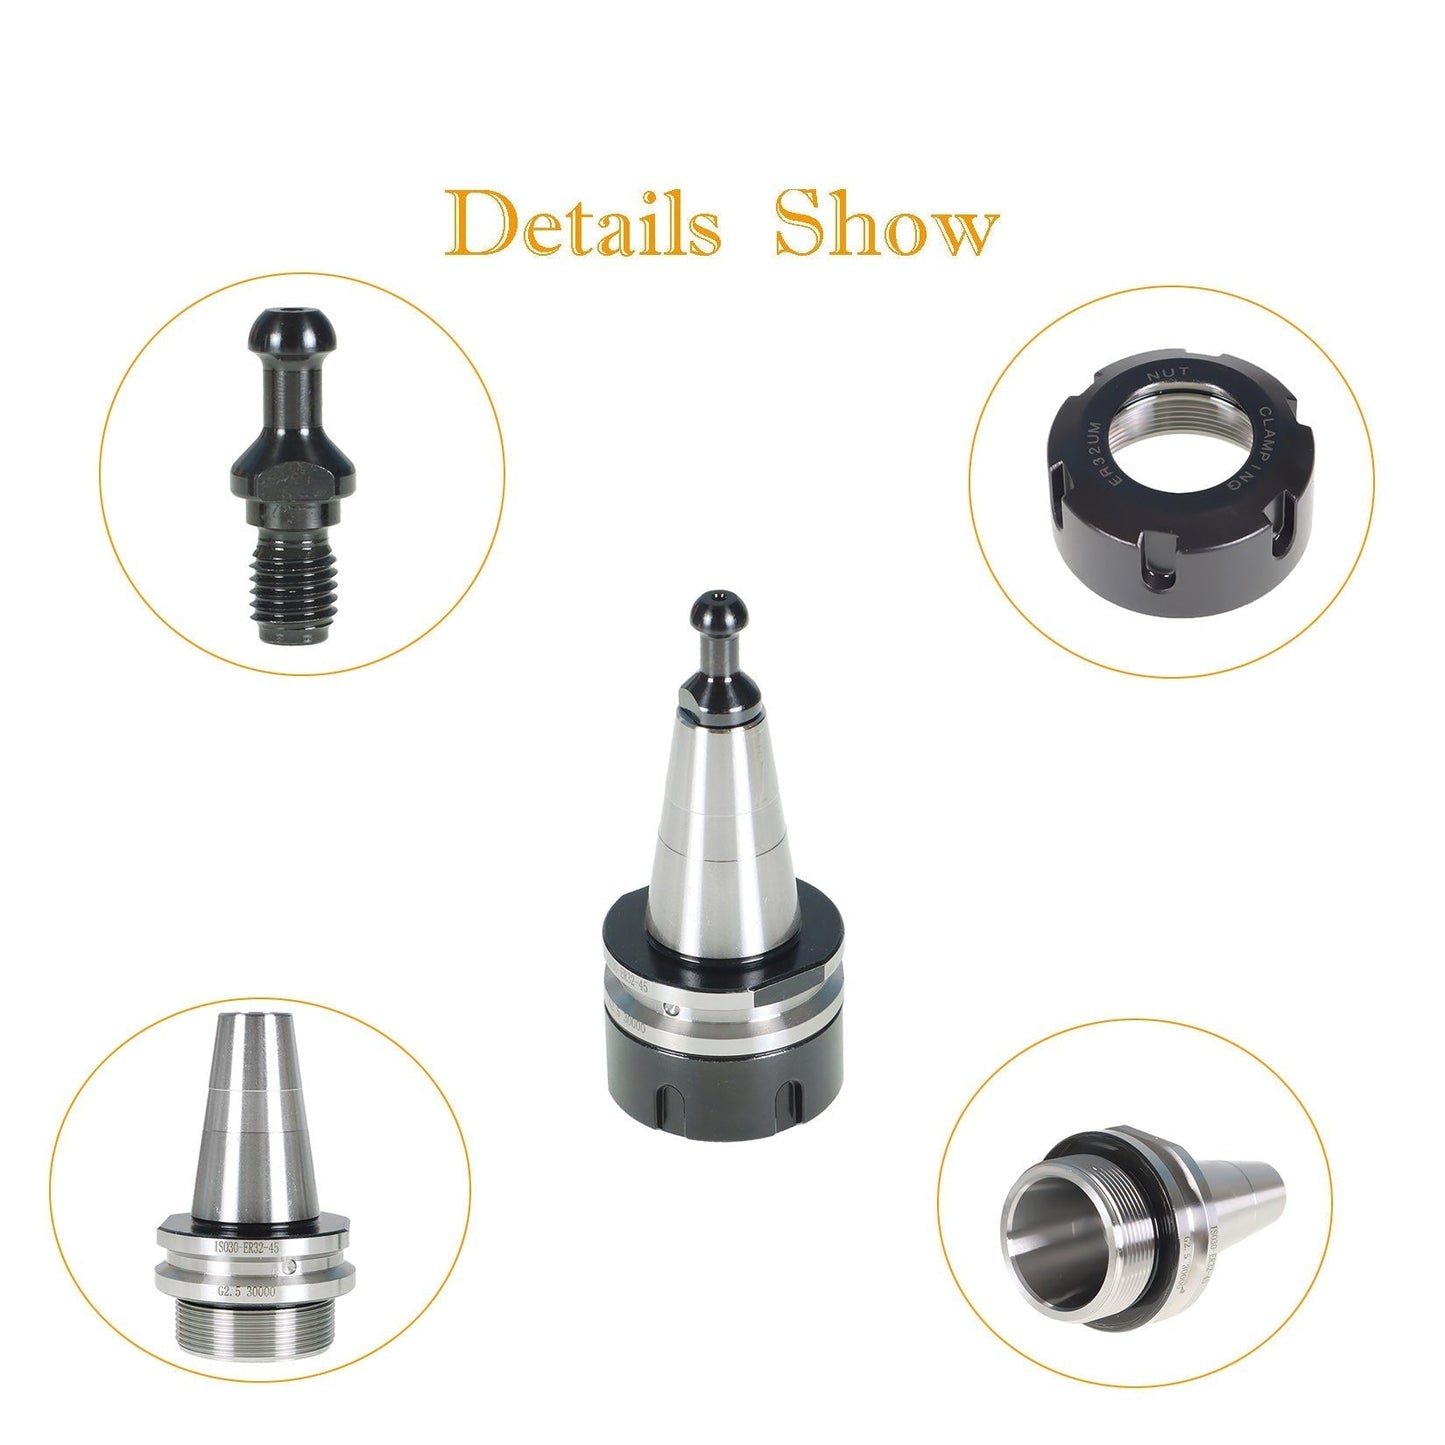 findmall  ISO30 ER32-45L Chuck Tool Holder Balance Collet Chuck G2.5 30000RPM CNC Stainless Steel Tool Holder with Pull Stud Milling Lathe Fit for CNC Engraving Machine and Milling Lathe Tool FINDMALLPARTS